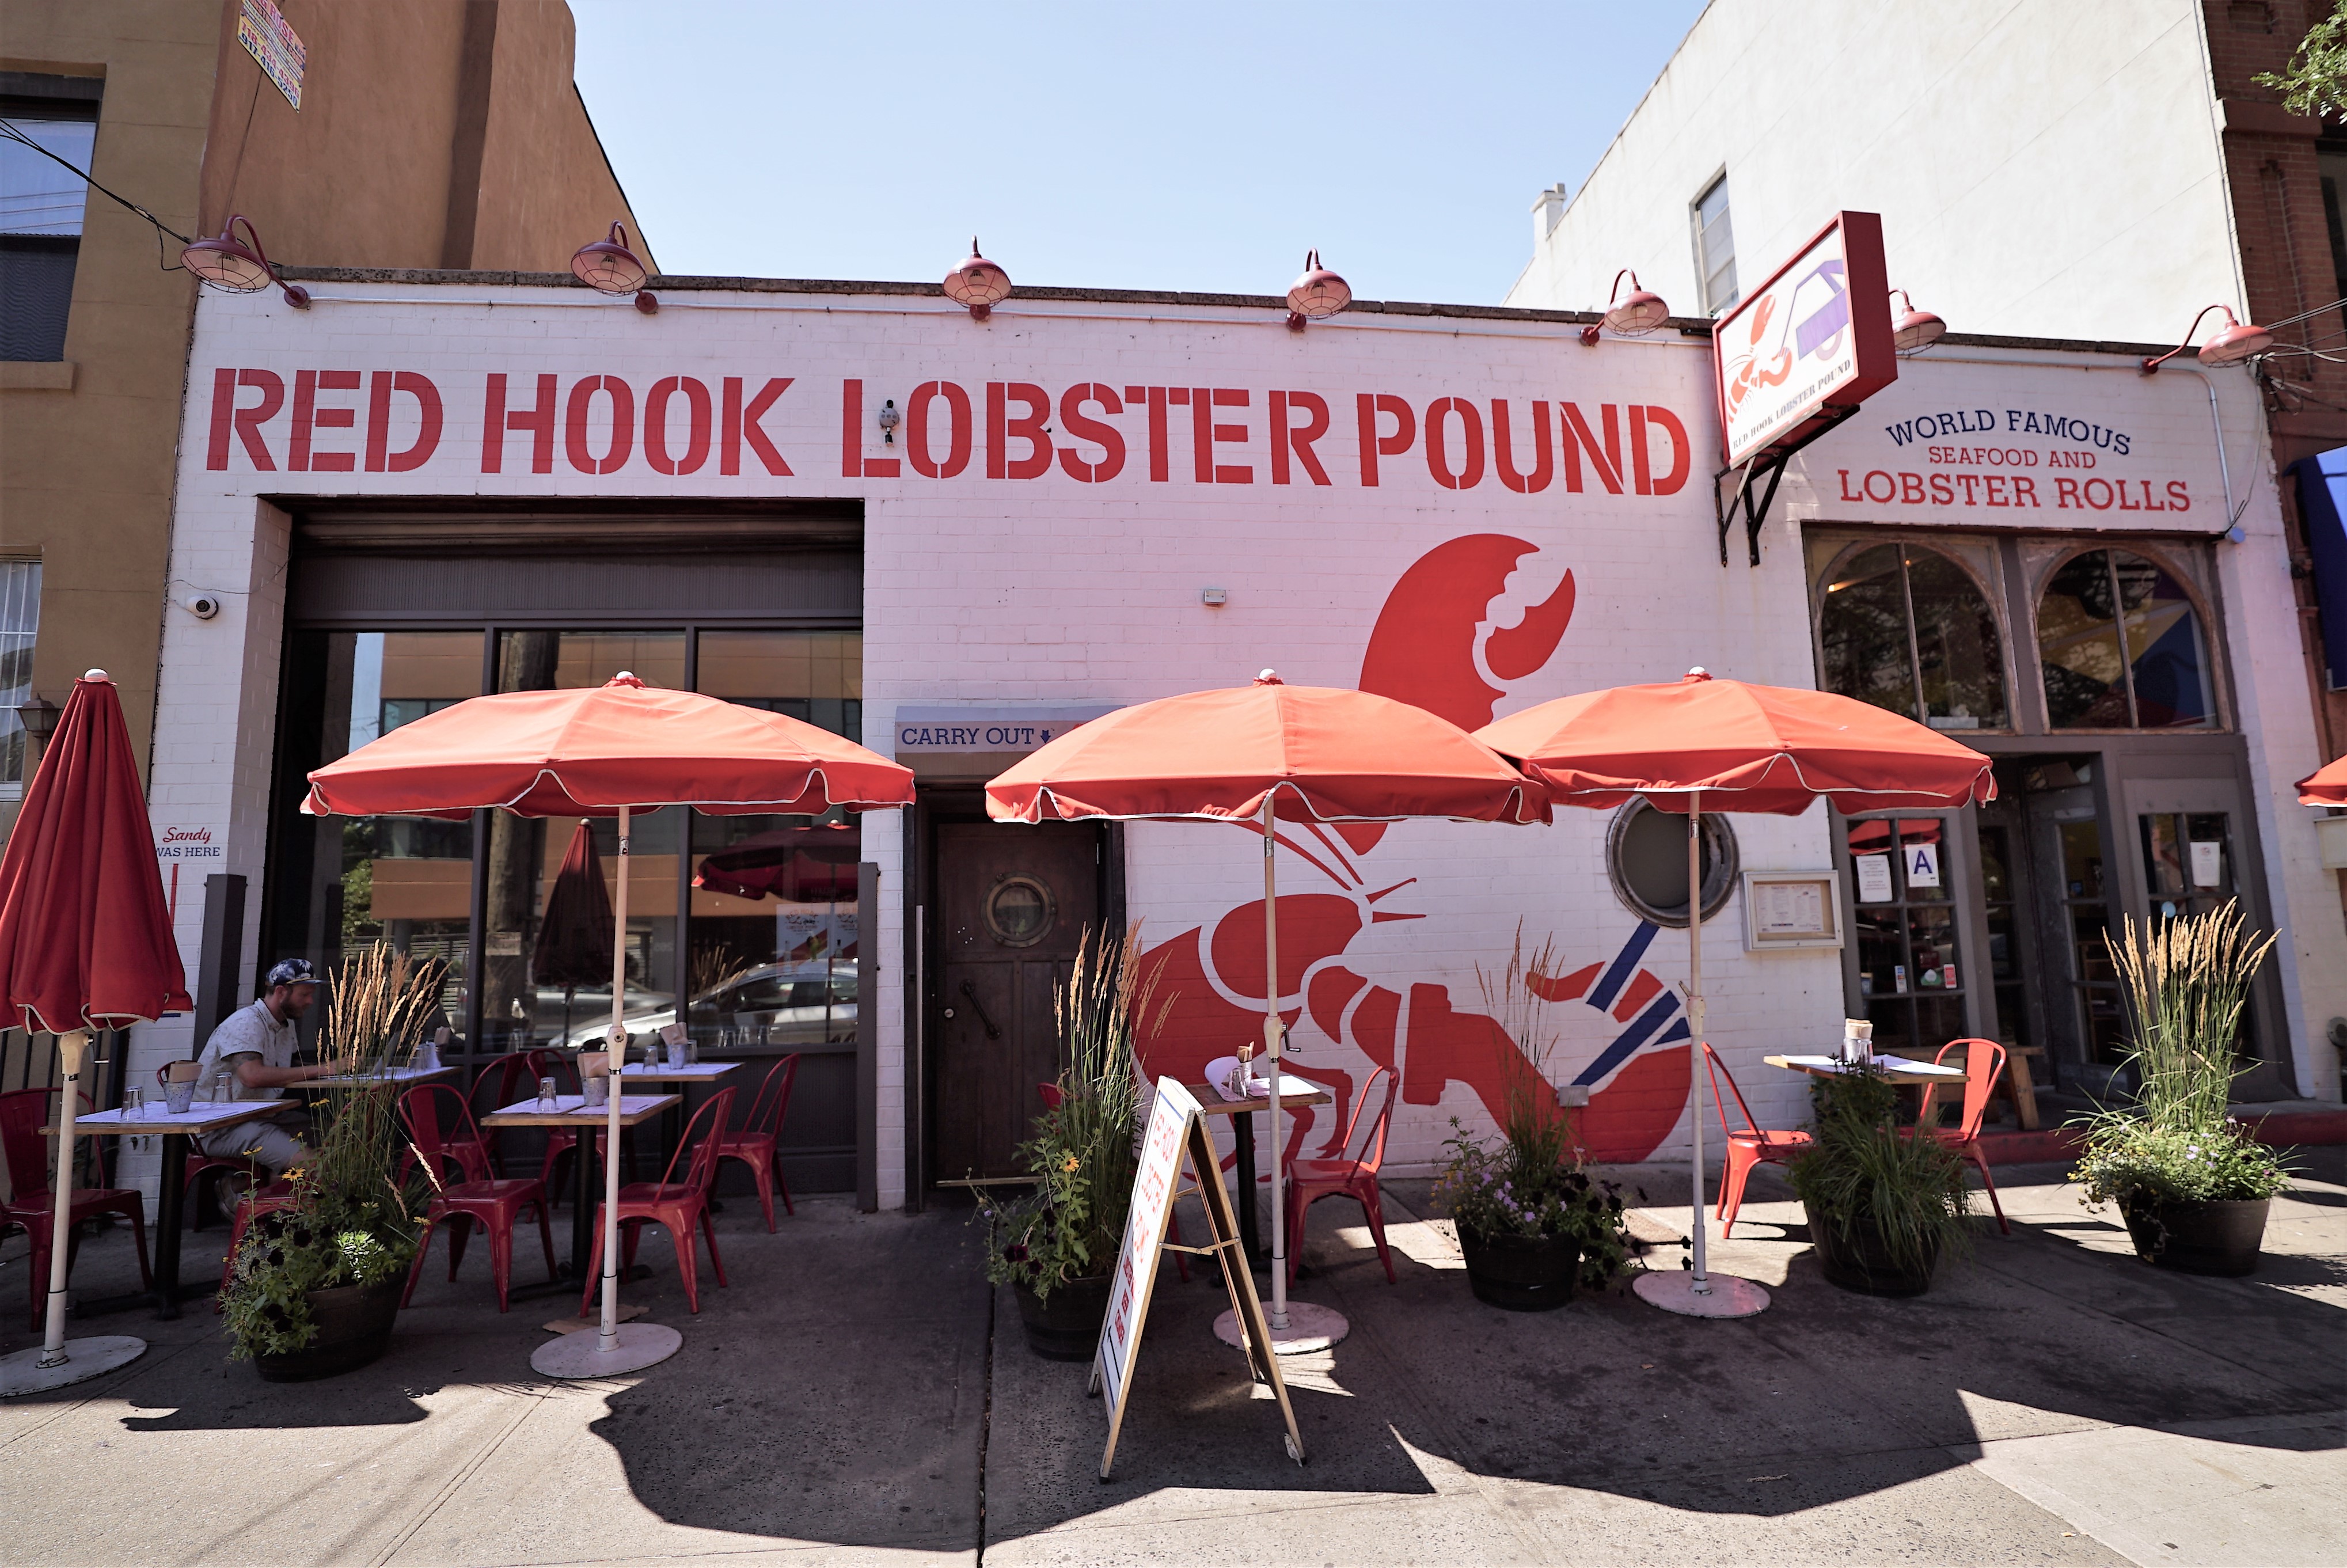 Red Hook Lobster Pound, Brooklyn NY 